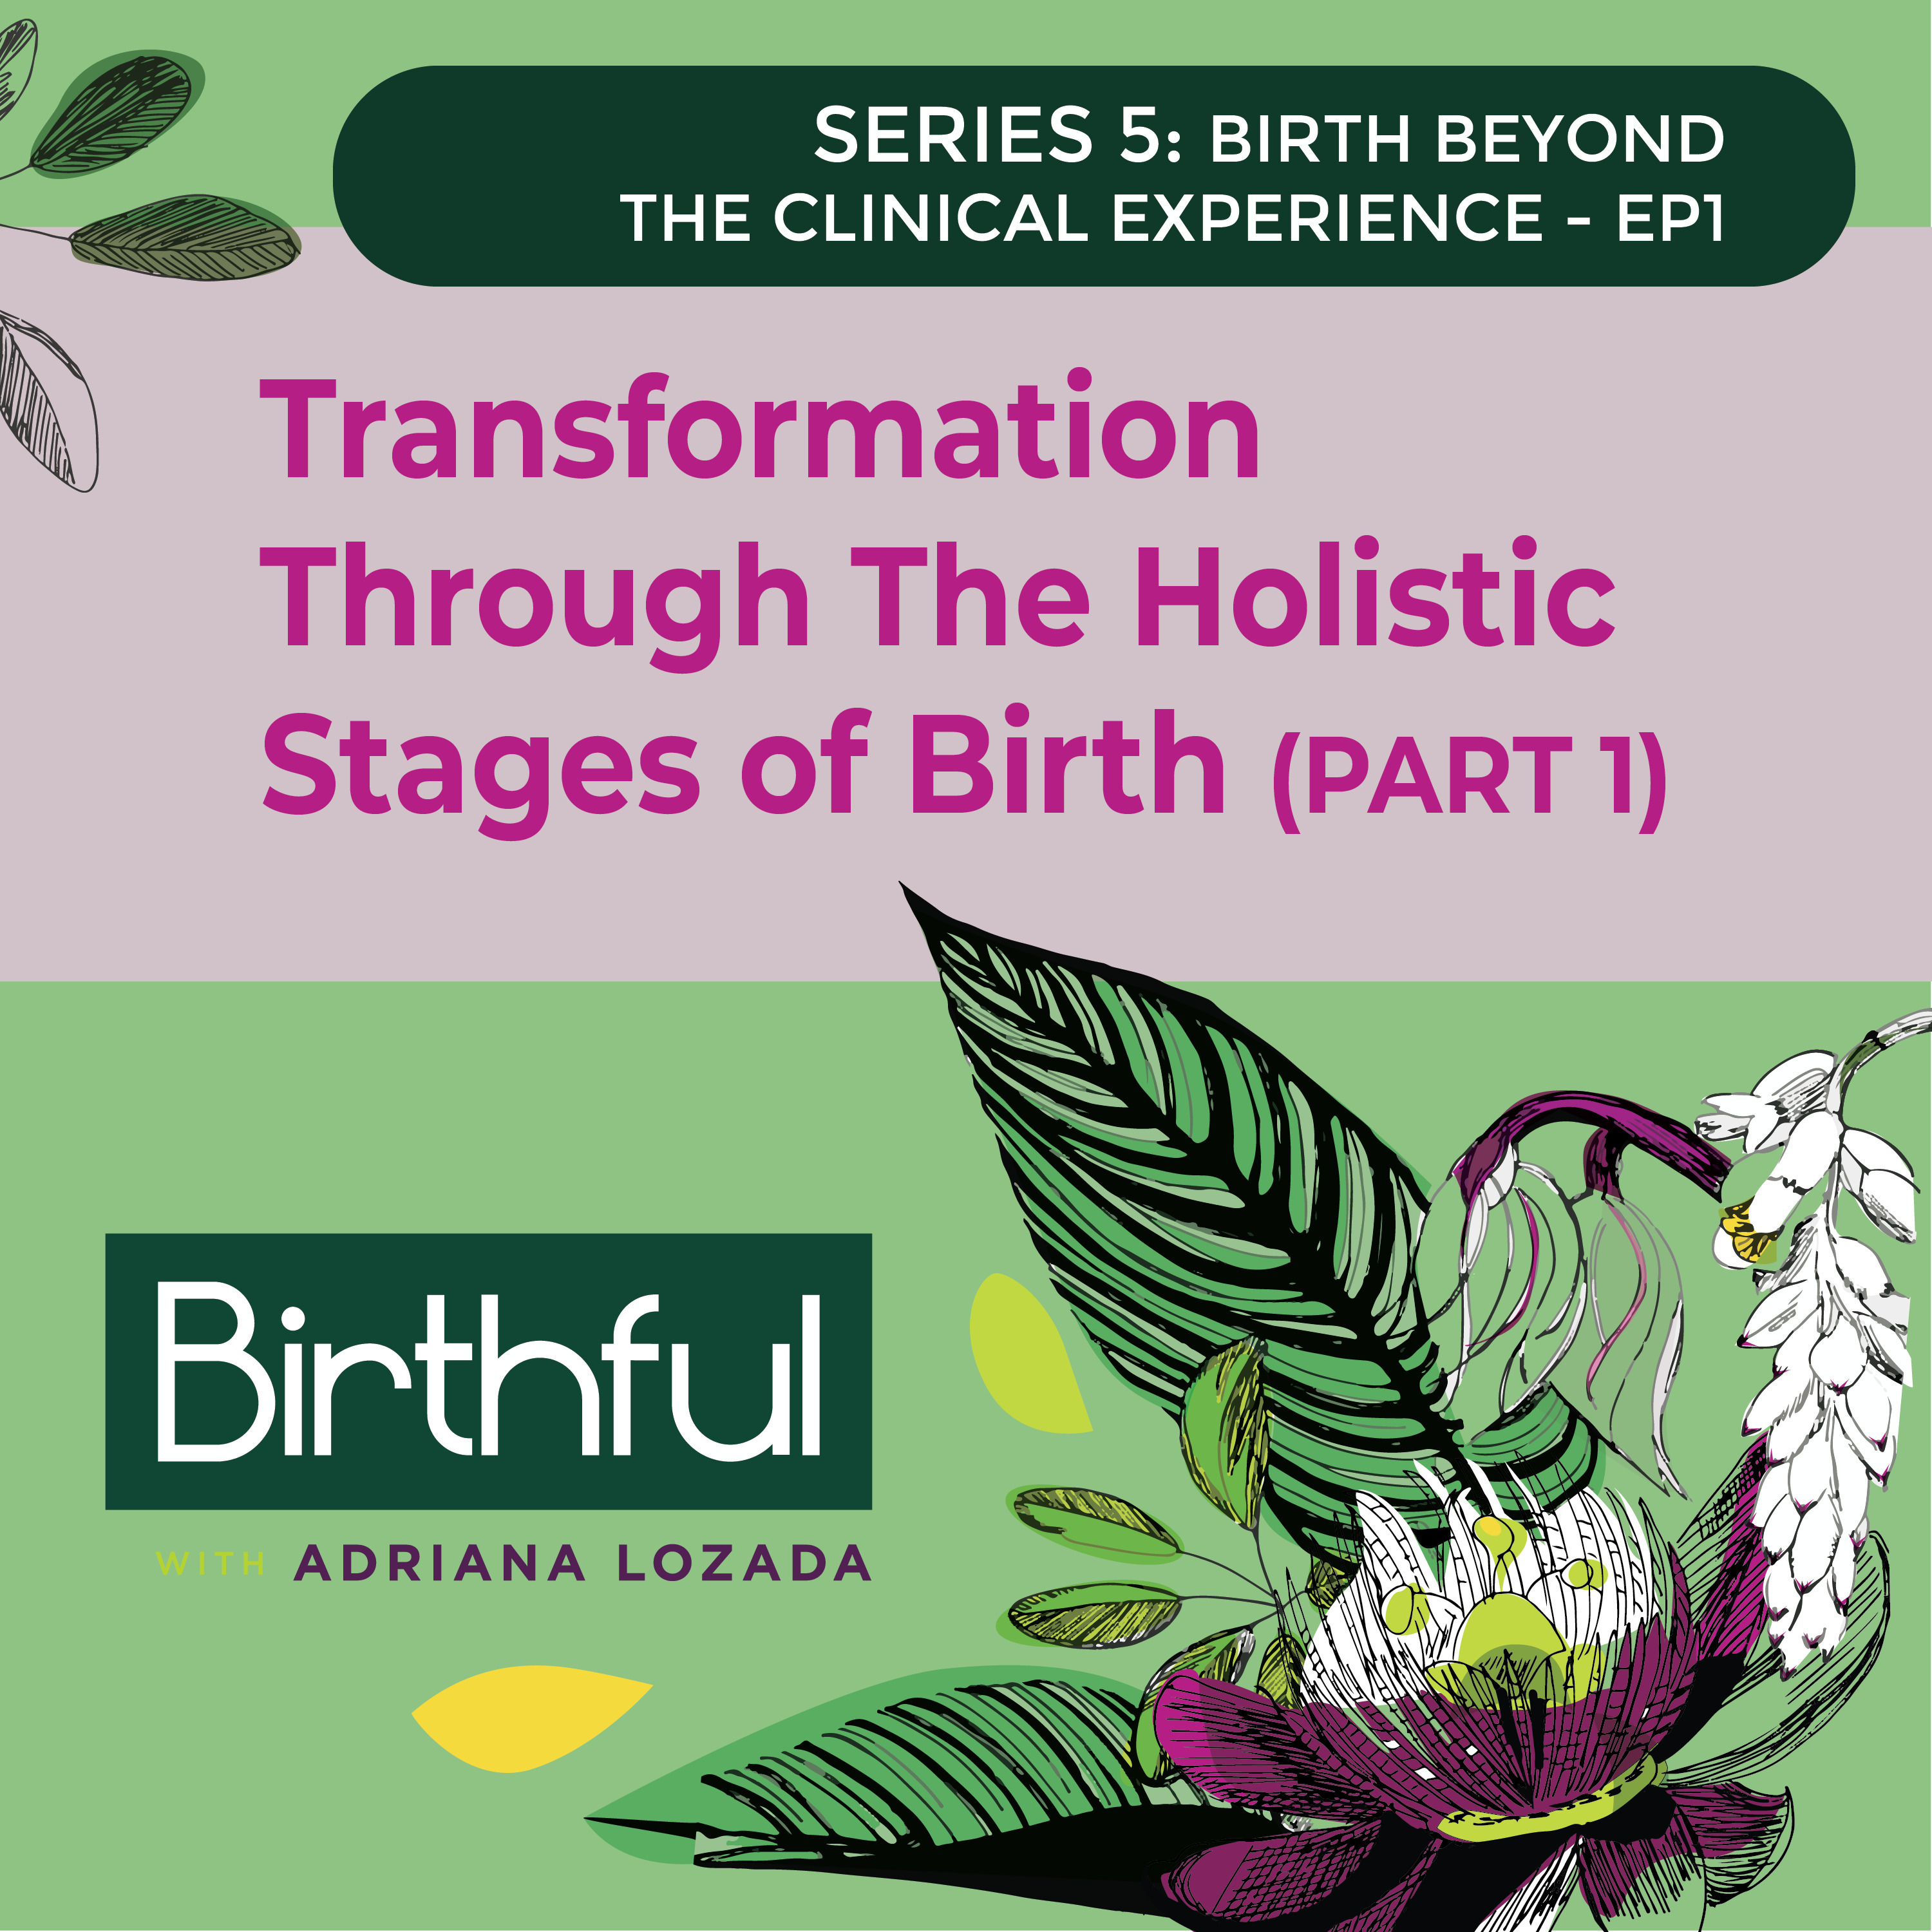 Transformation Through The Holistic Stages of Birth (Part One)